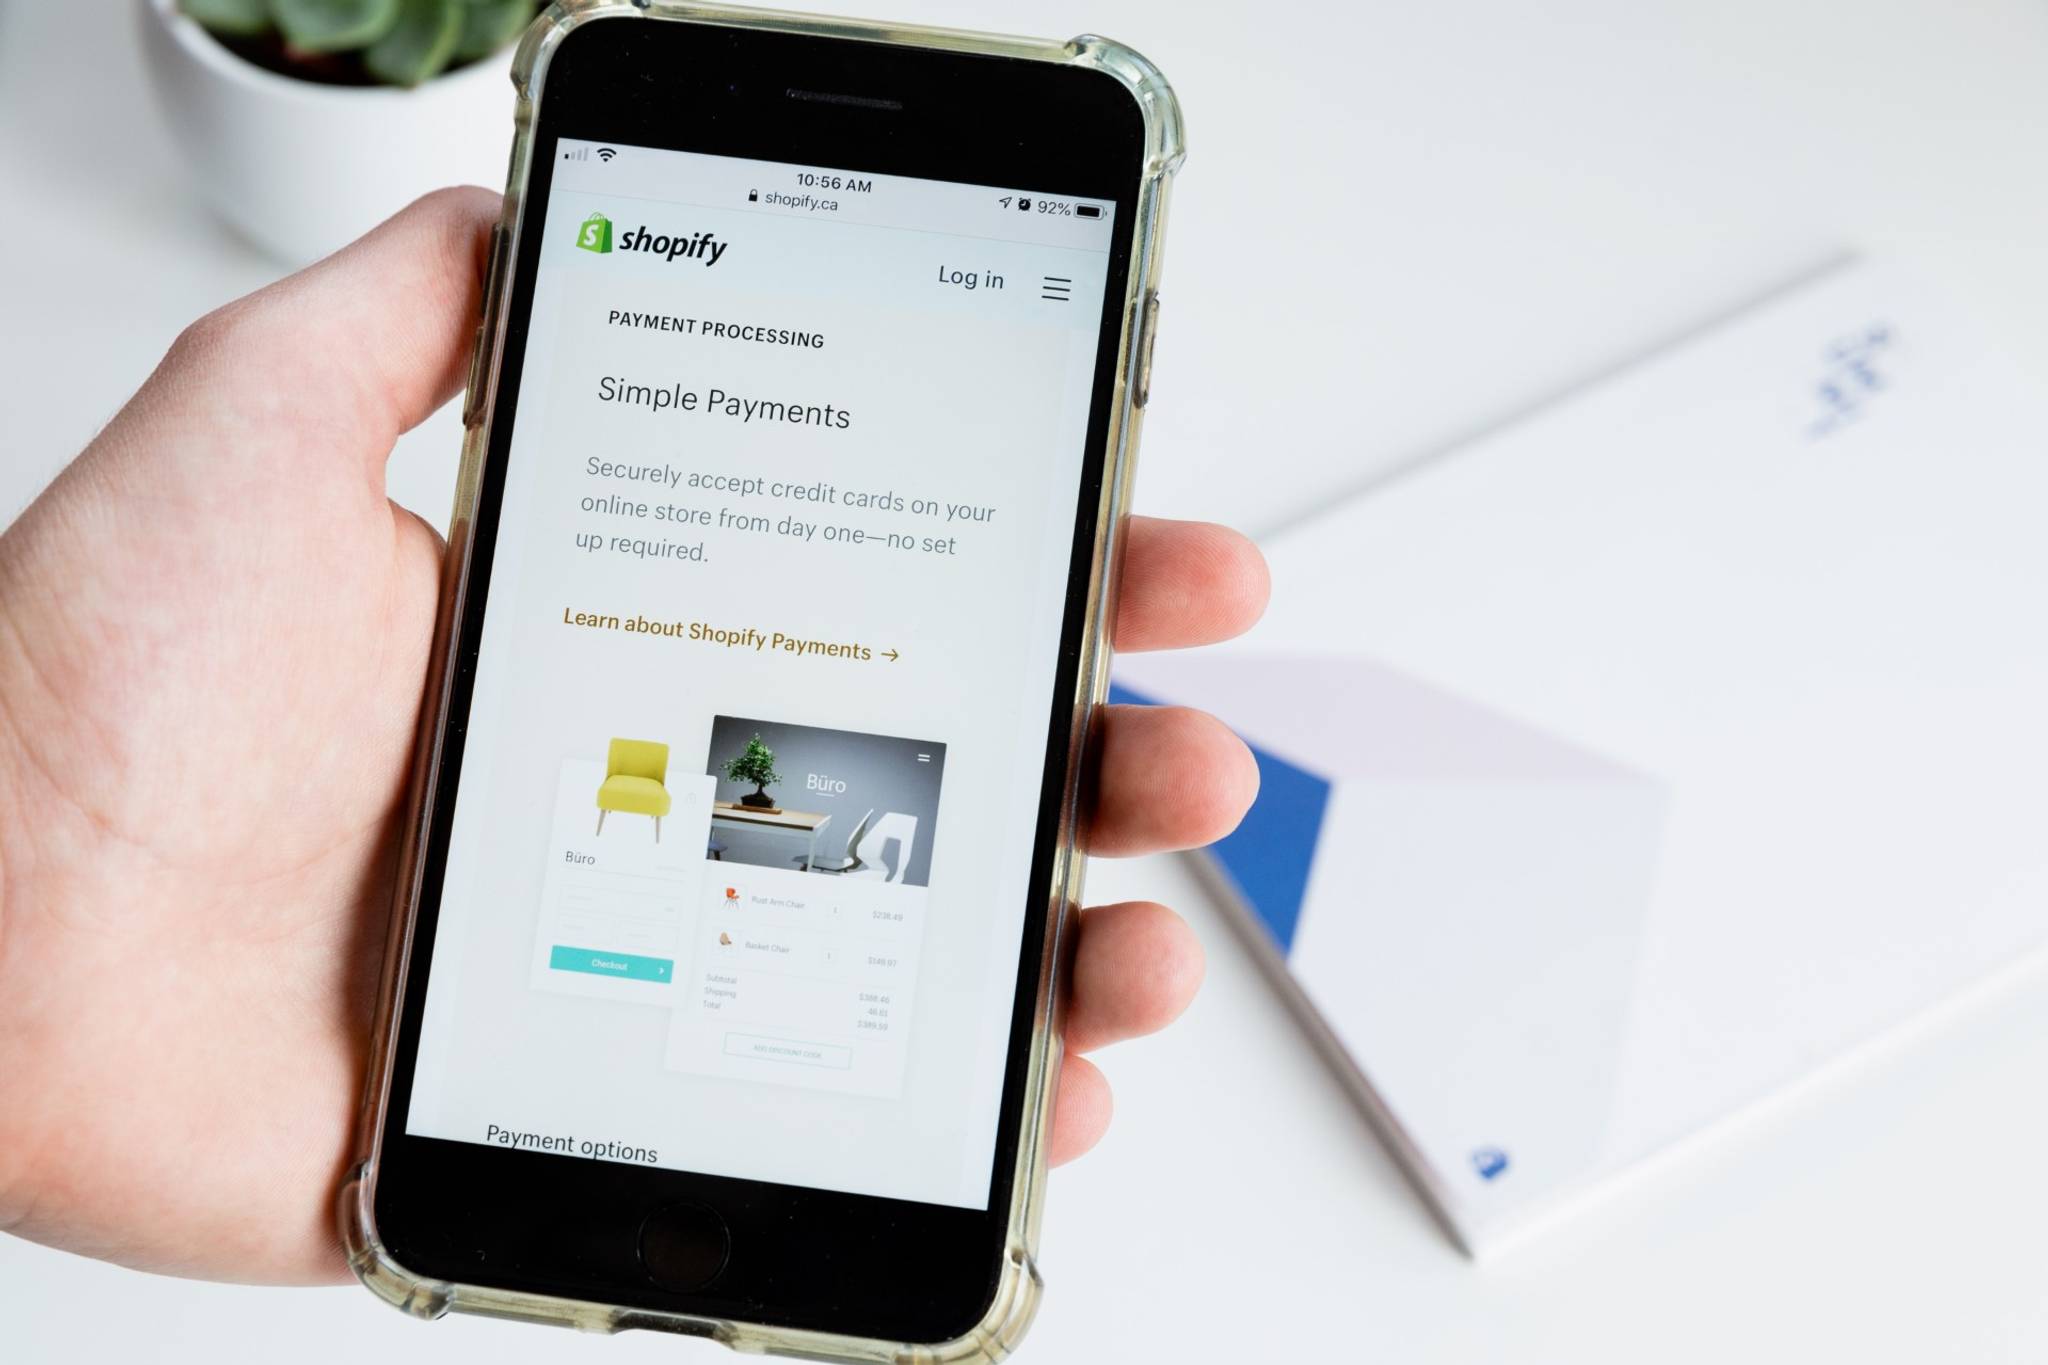 Shopify spotlights small biz to drive consumer support